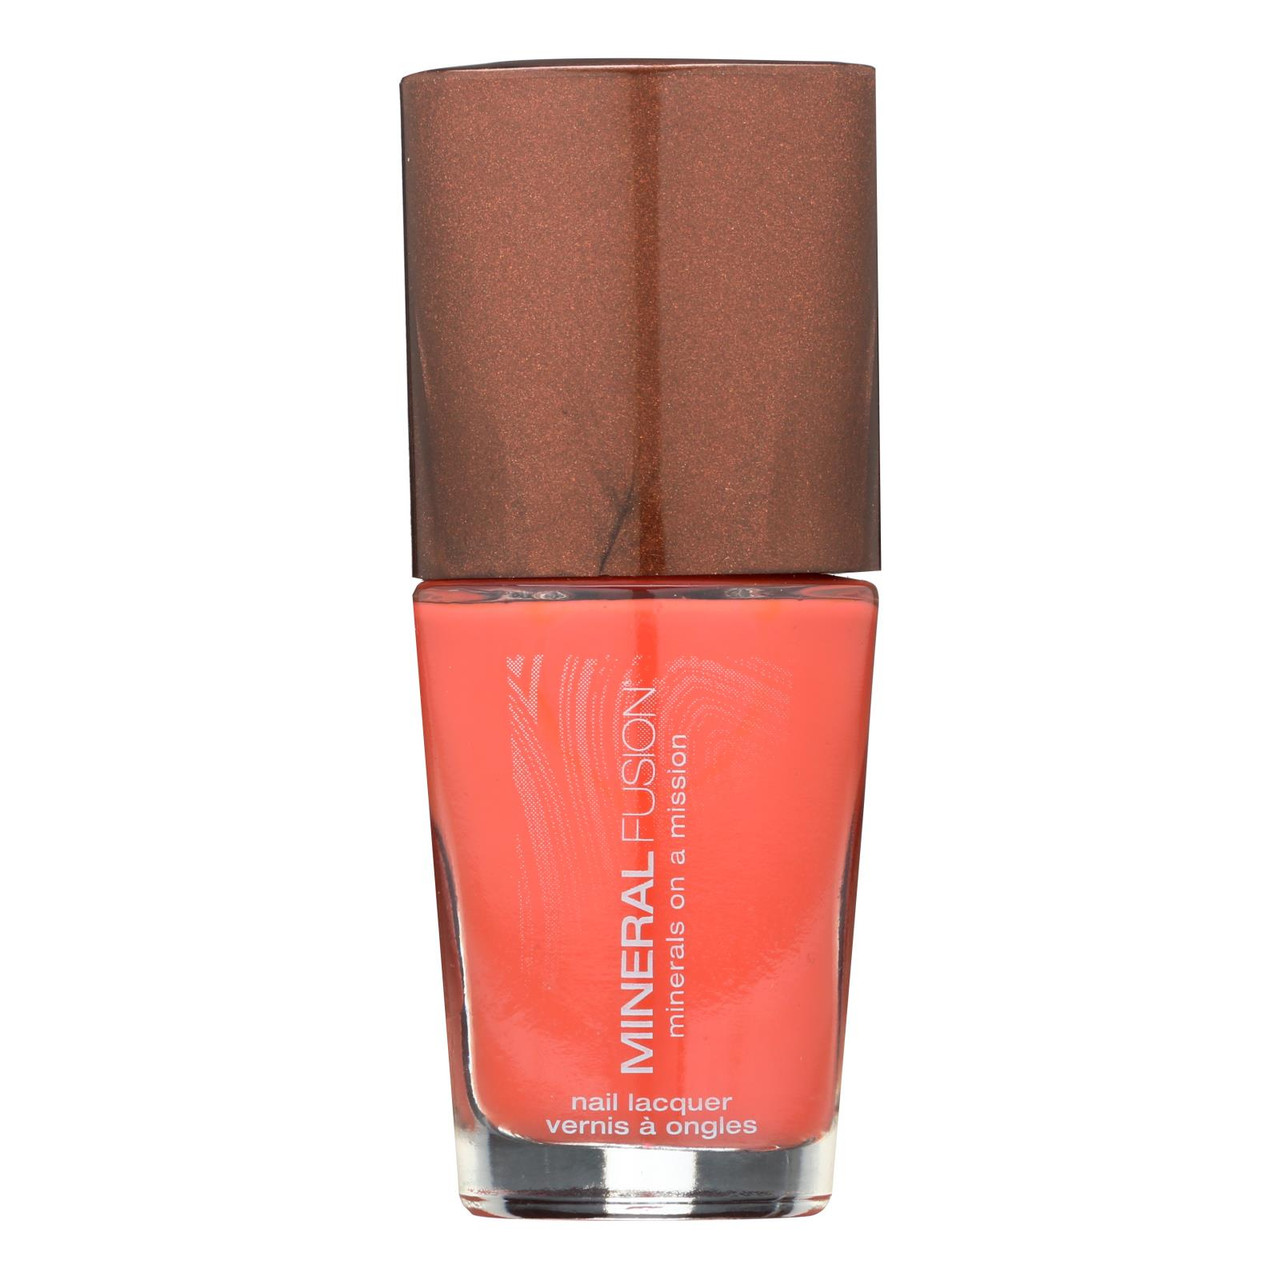 Image of Mineral Fusion - Nail Polish - Sunkissed - 0.33 oz.